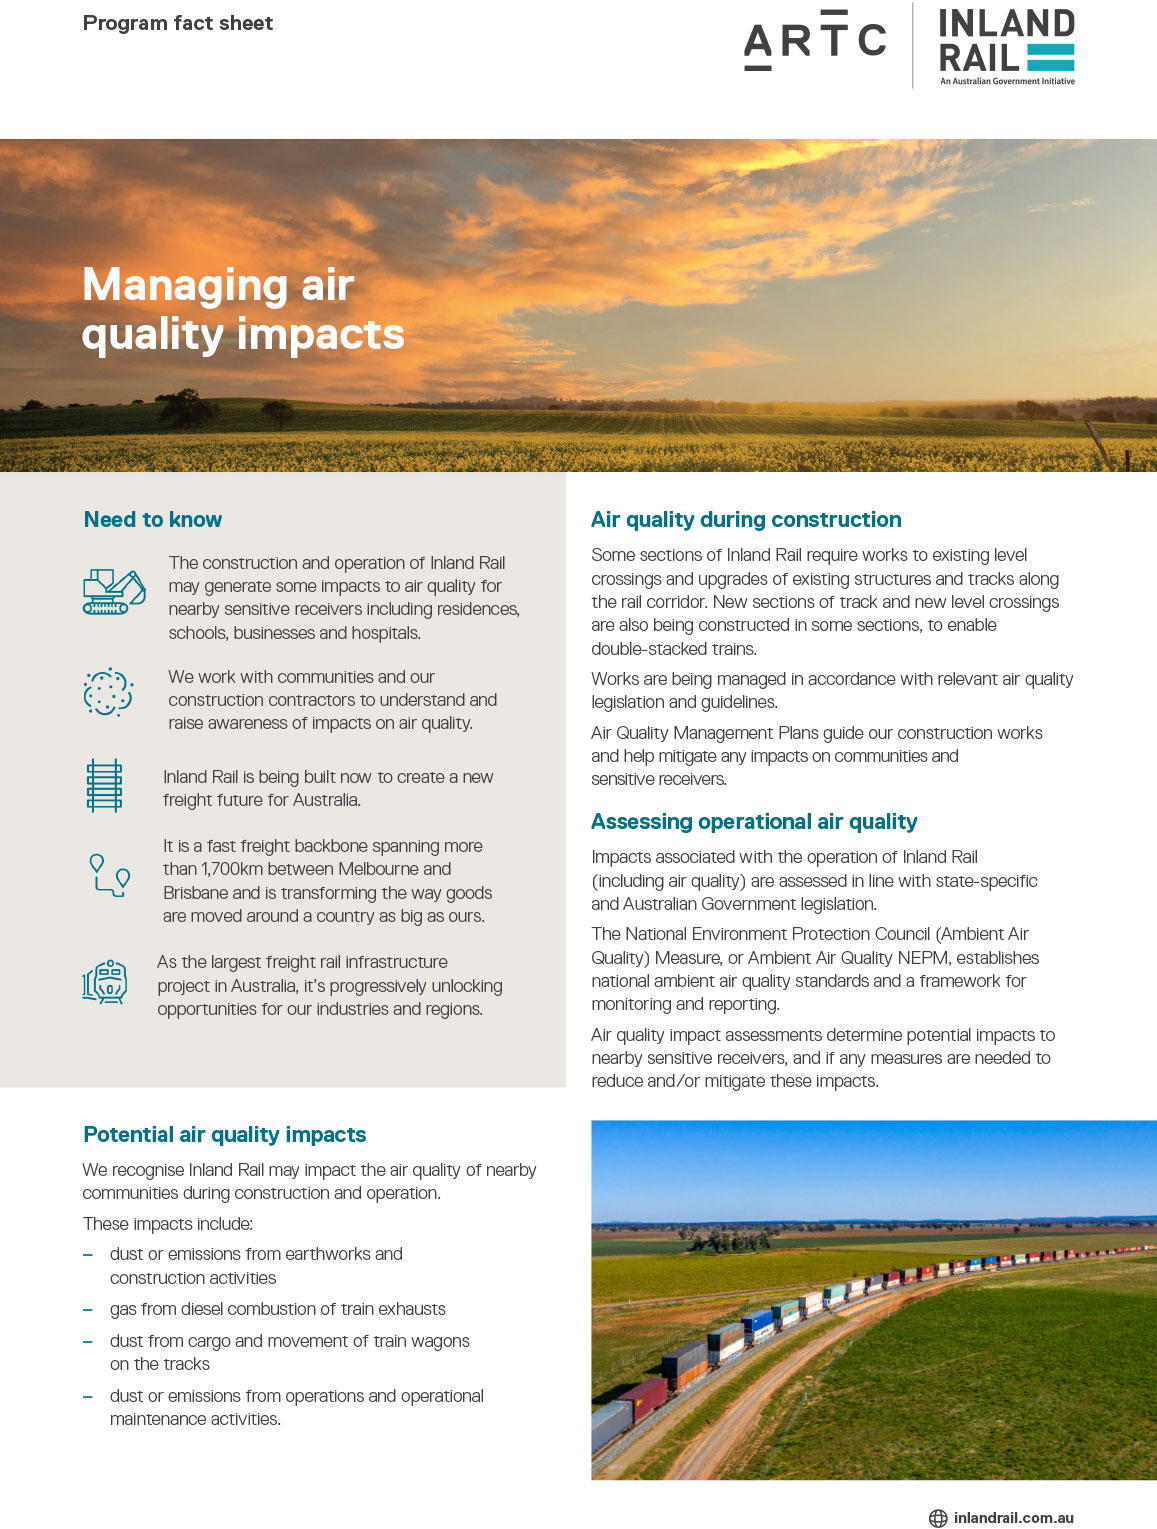 Image thumbnail for Managing Air Quality Impacts